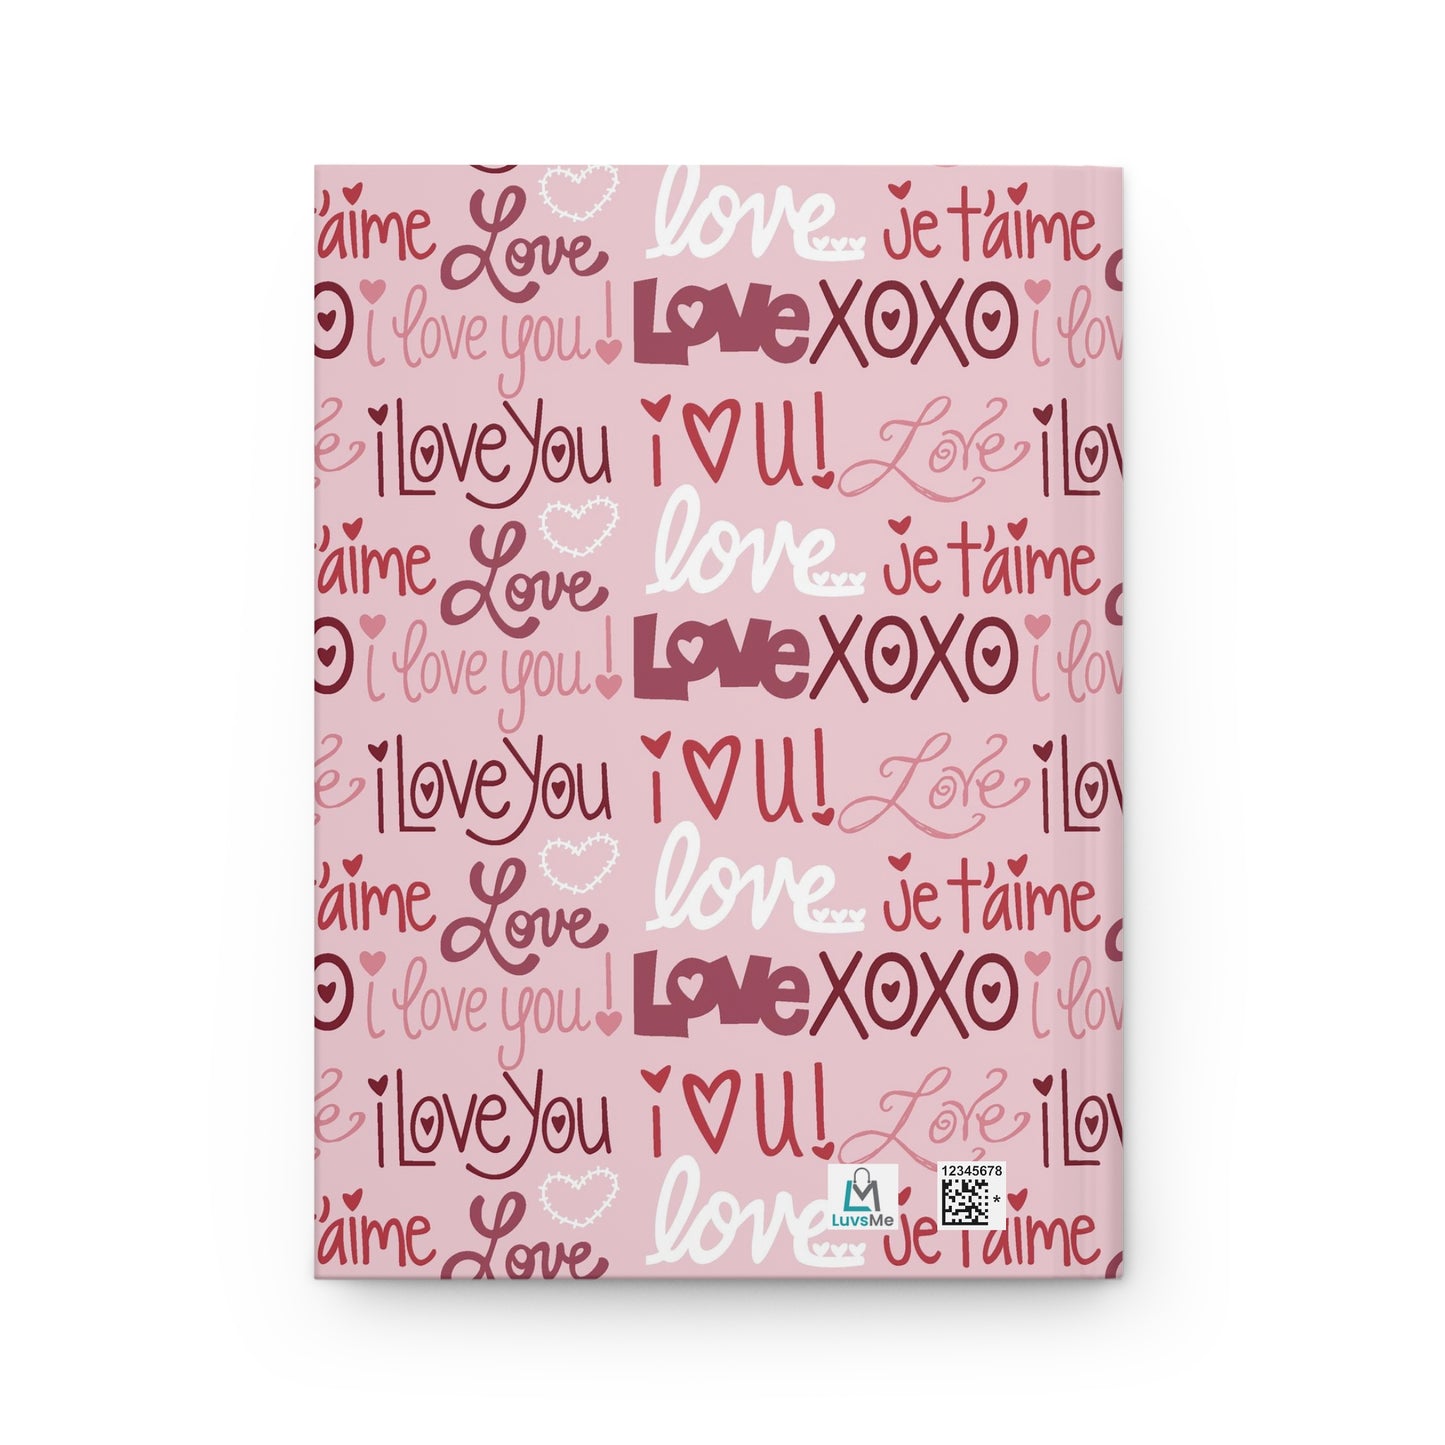 I Love You - LOVE - Pink, Red, and White - Hardcover Lined Journal Matte